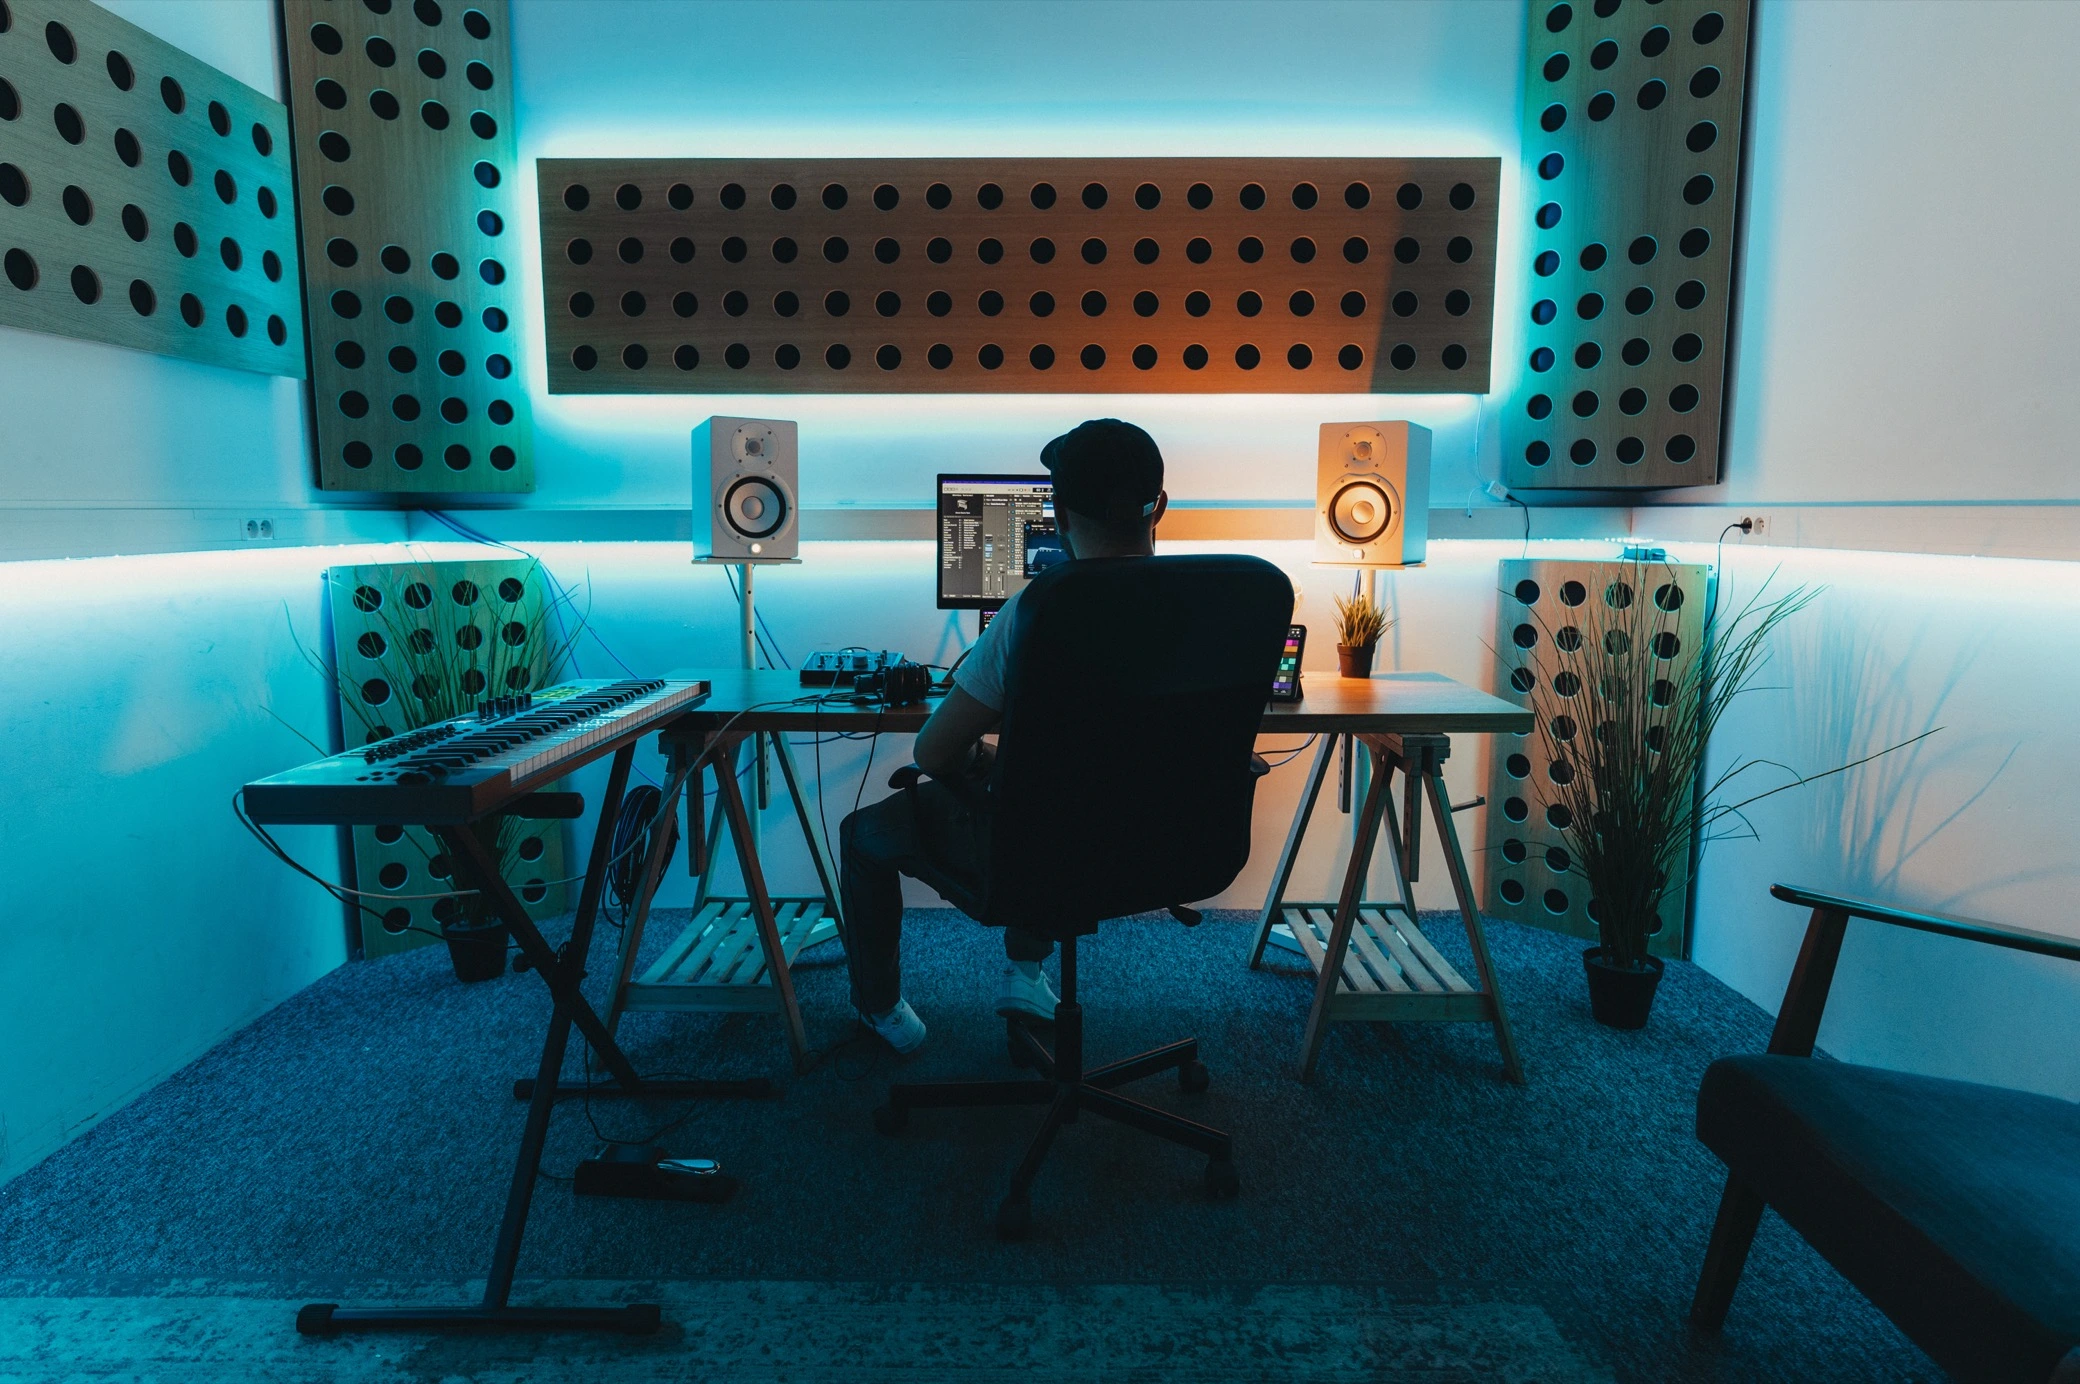 Photo of artists producing and playing in a beatmaking studio